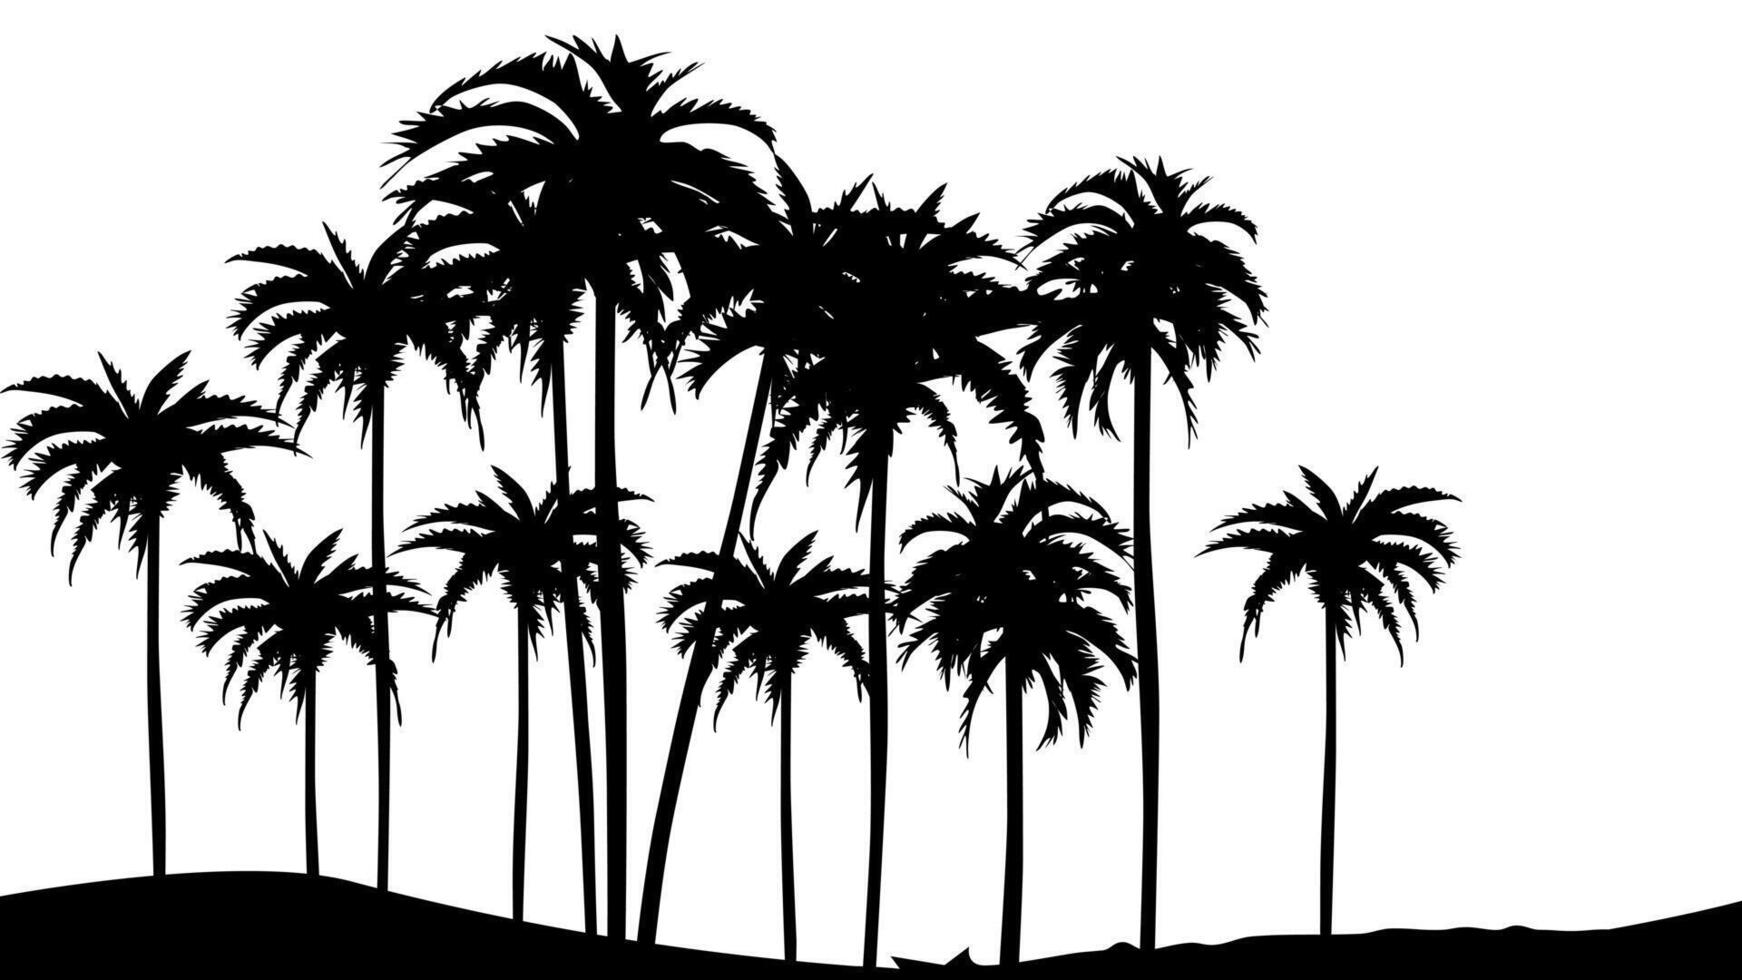 silhouette of palm trees on a hill vector